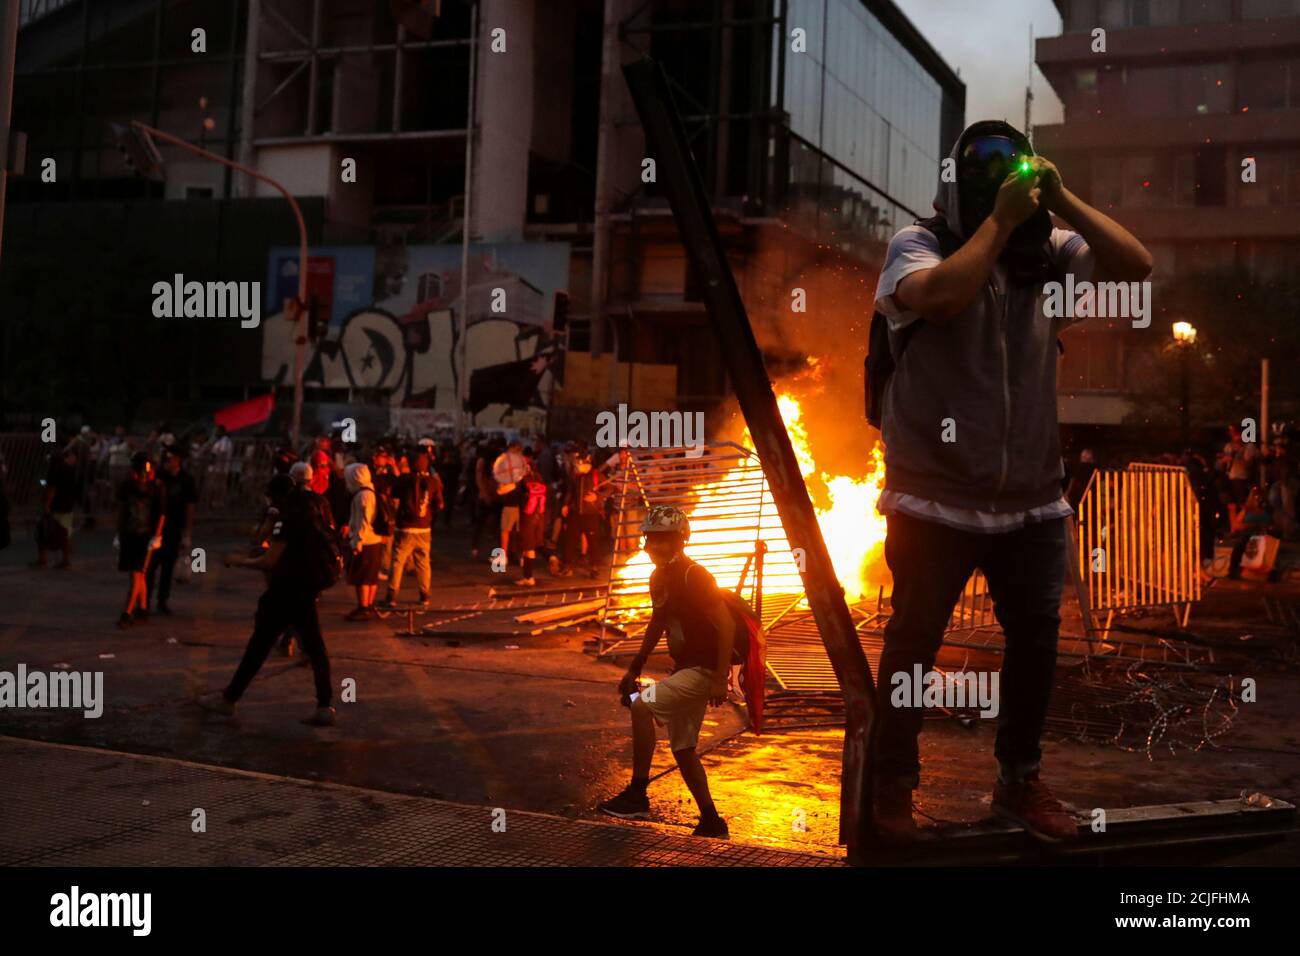 A demonstrator uses a laser pointer near a barricade on fire during a  protest against Chile's government, in Santiago, Chile November 22, 2019.  REUTERS/Pablo Sanhueza Stock Photo - Alamy